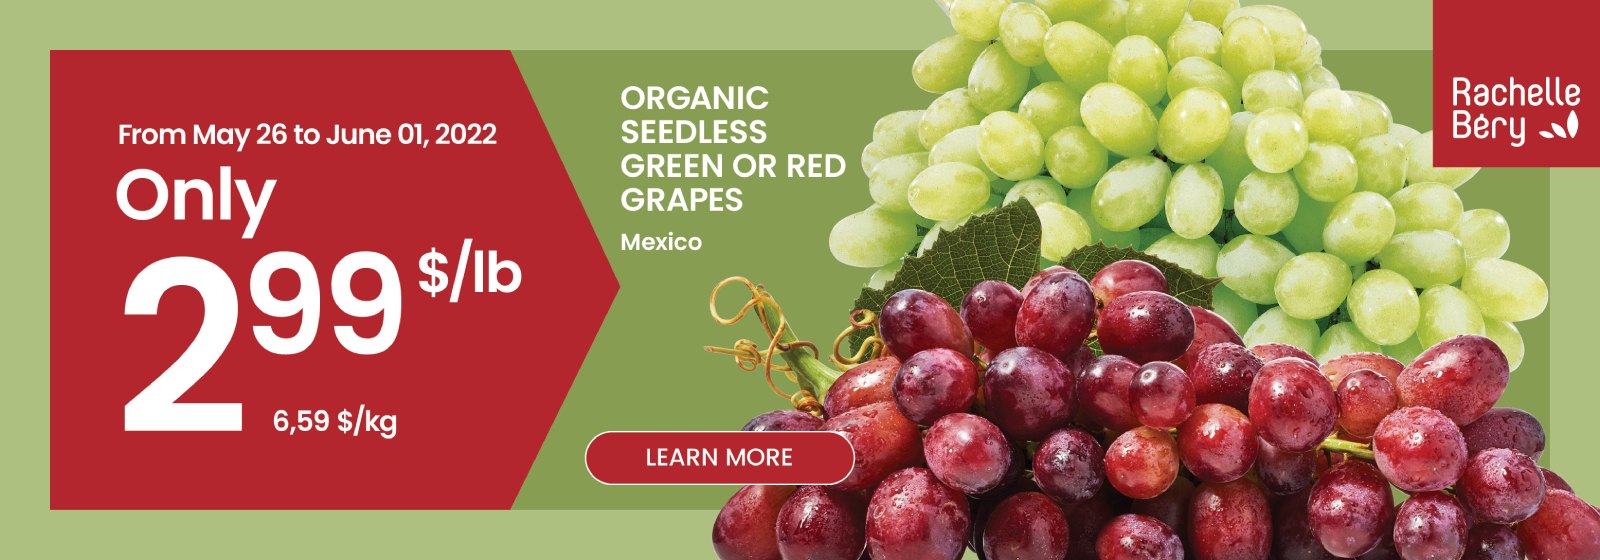 Text Reading 'Buy Organic seedless green or red grapes from Mexico only at $2.99 per pound from May 26th to June 01st, 2022. 'Learn More' information from the button given below.'